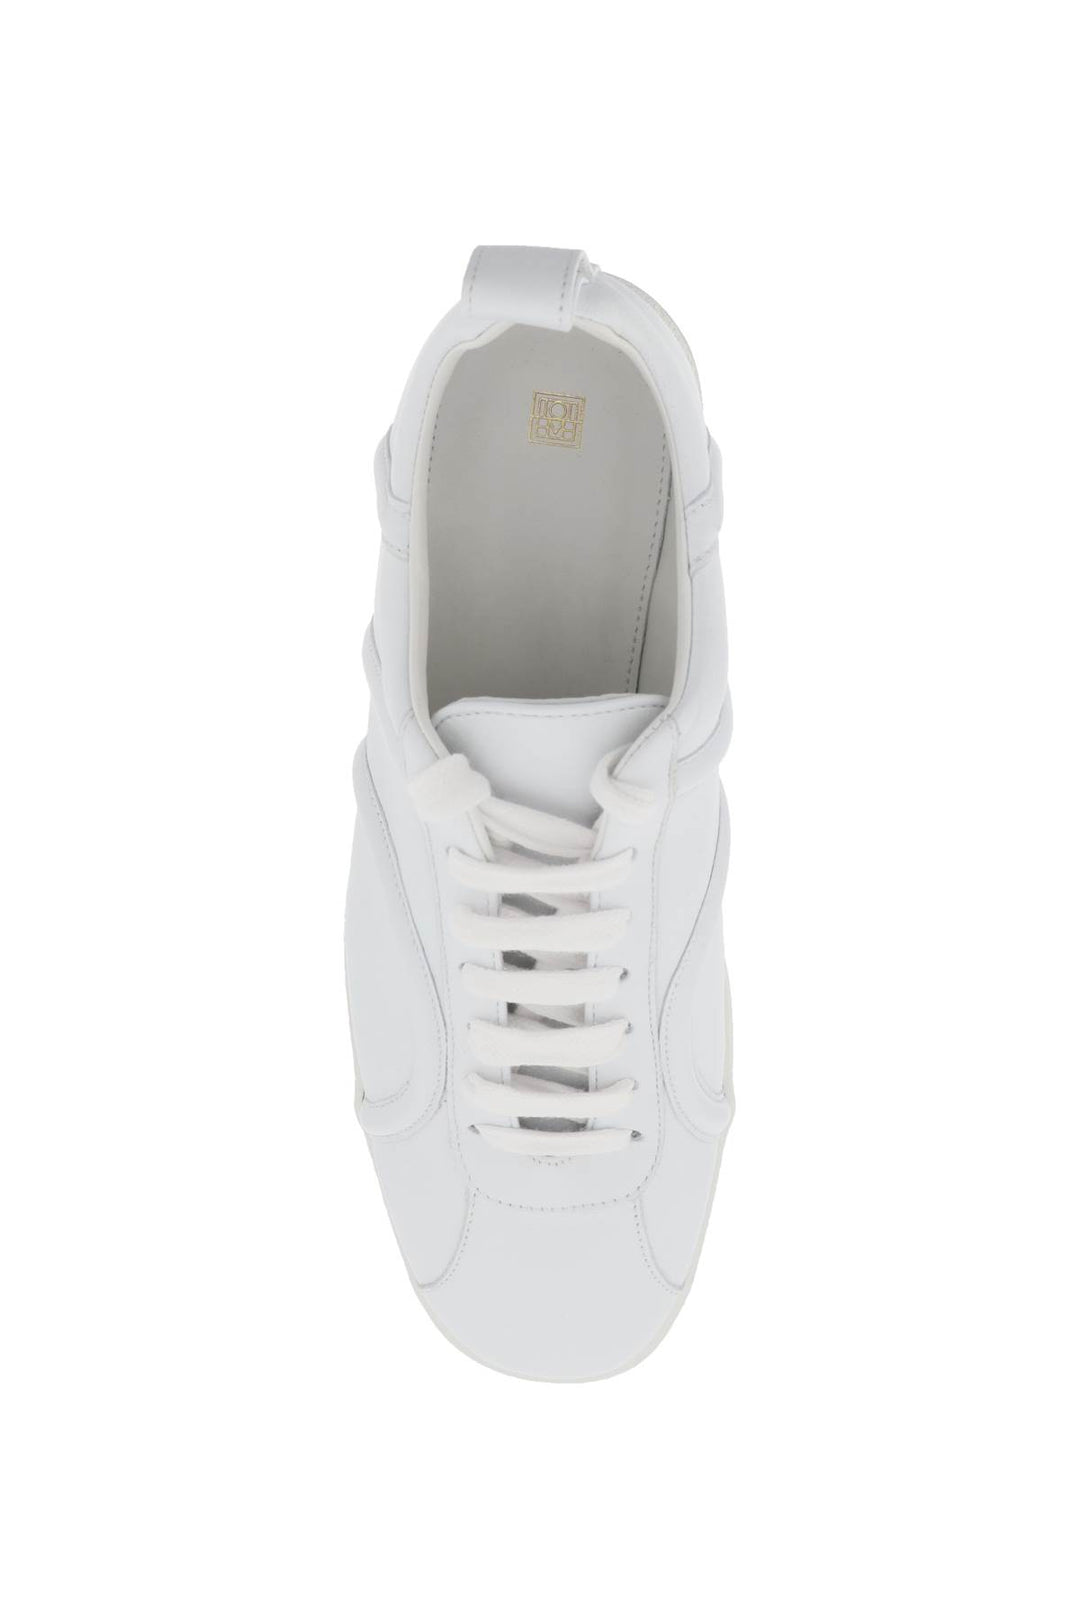 Toteme Leather Sneakers   White